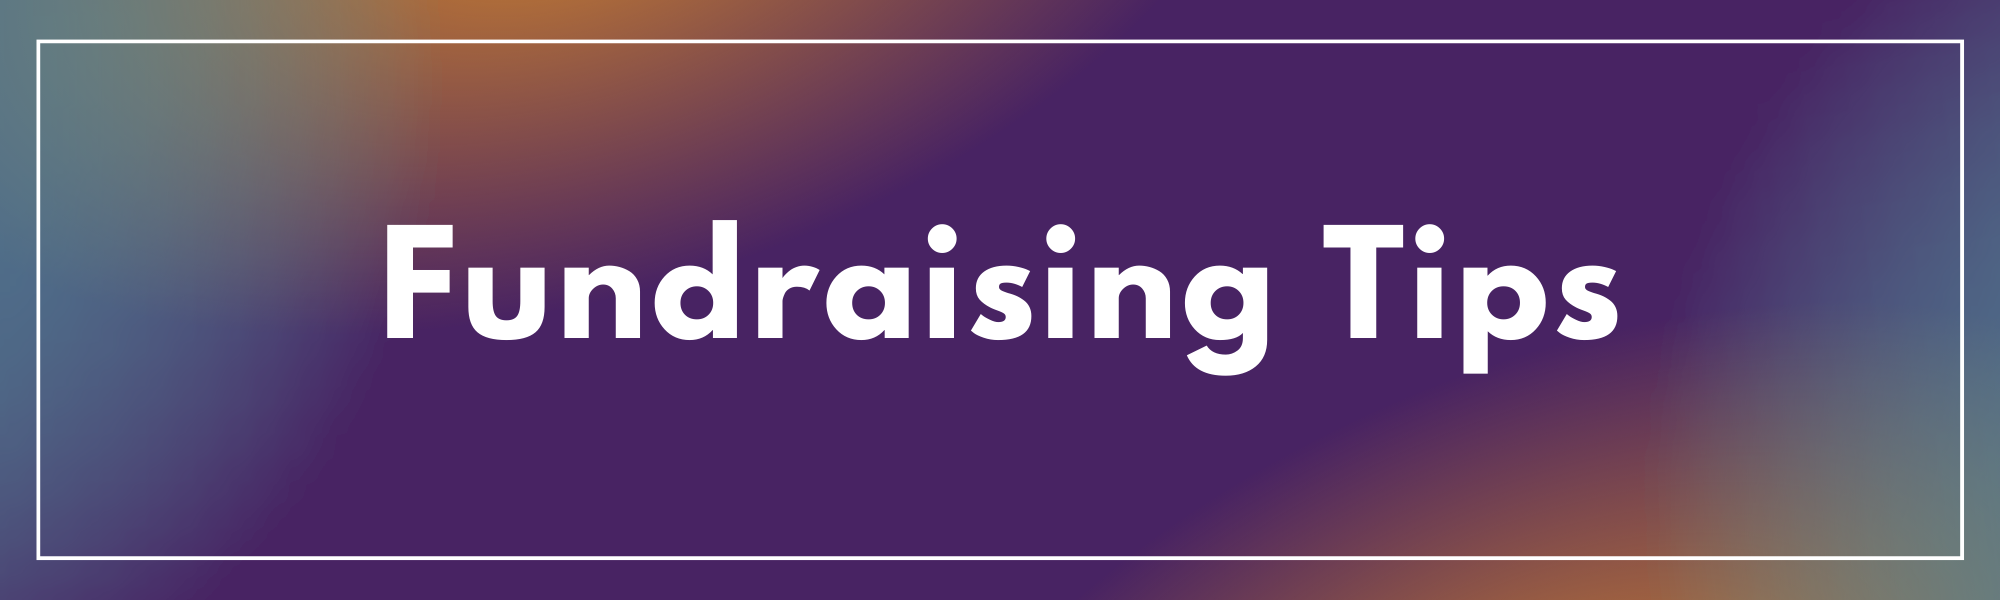 Fundraising Tips Buttons